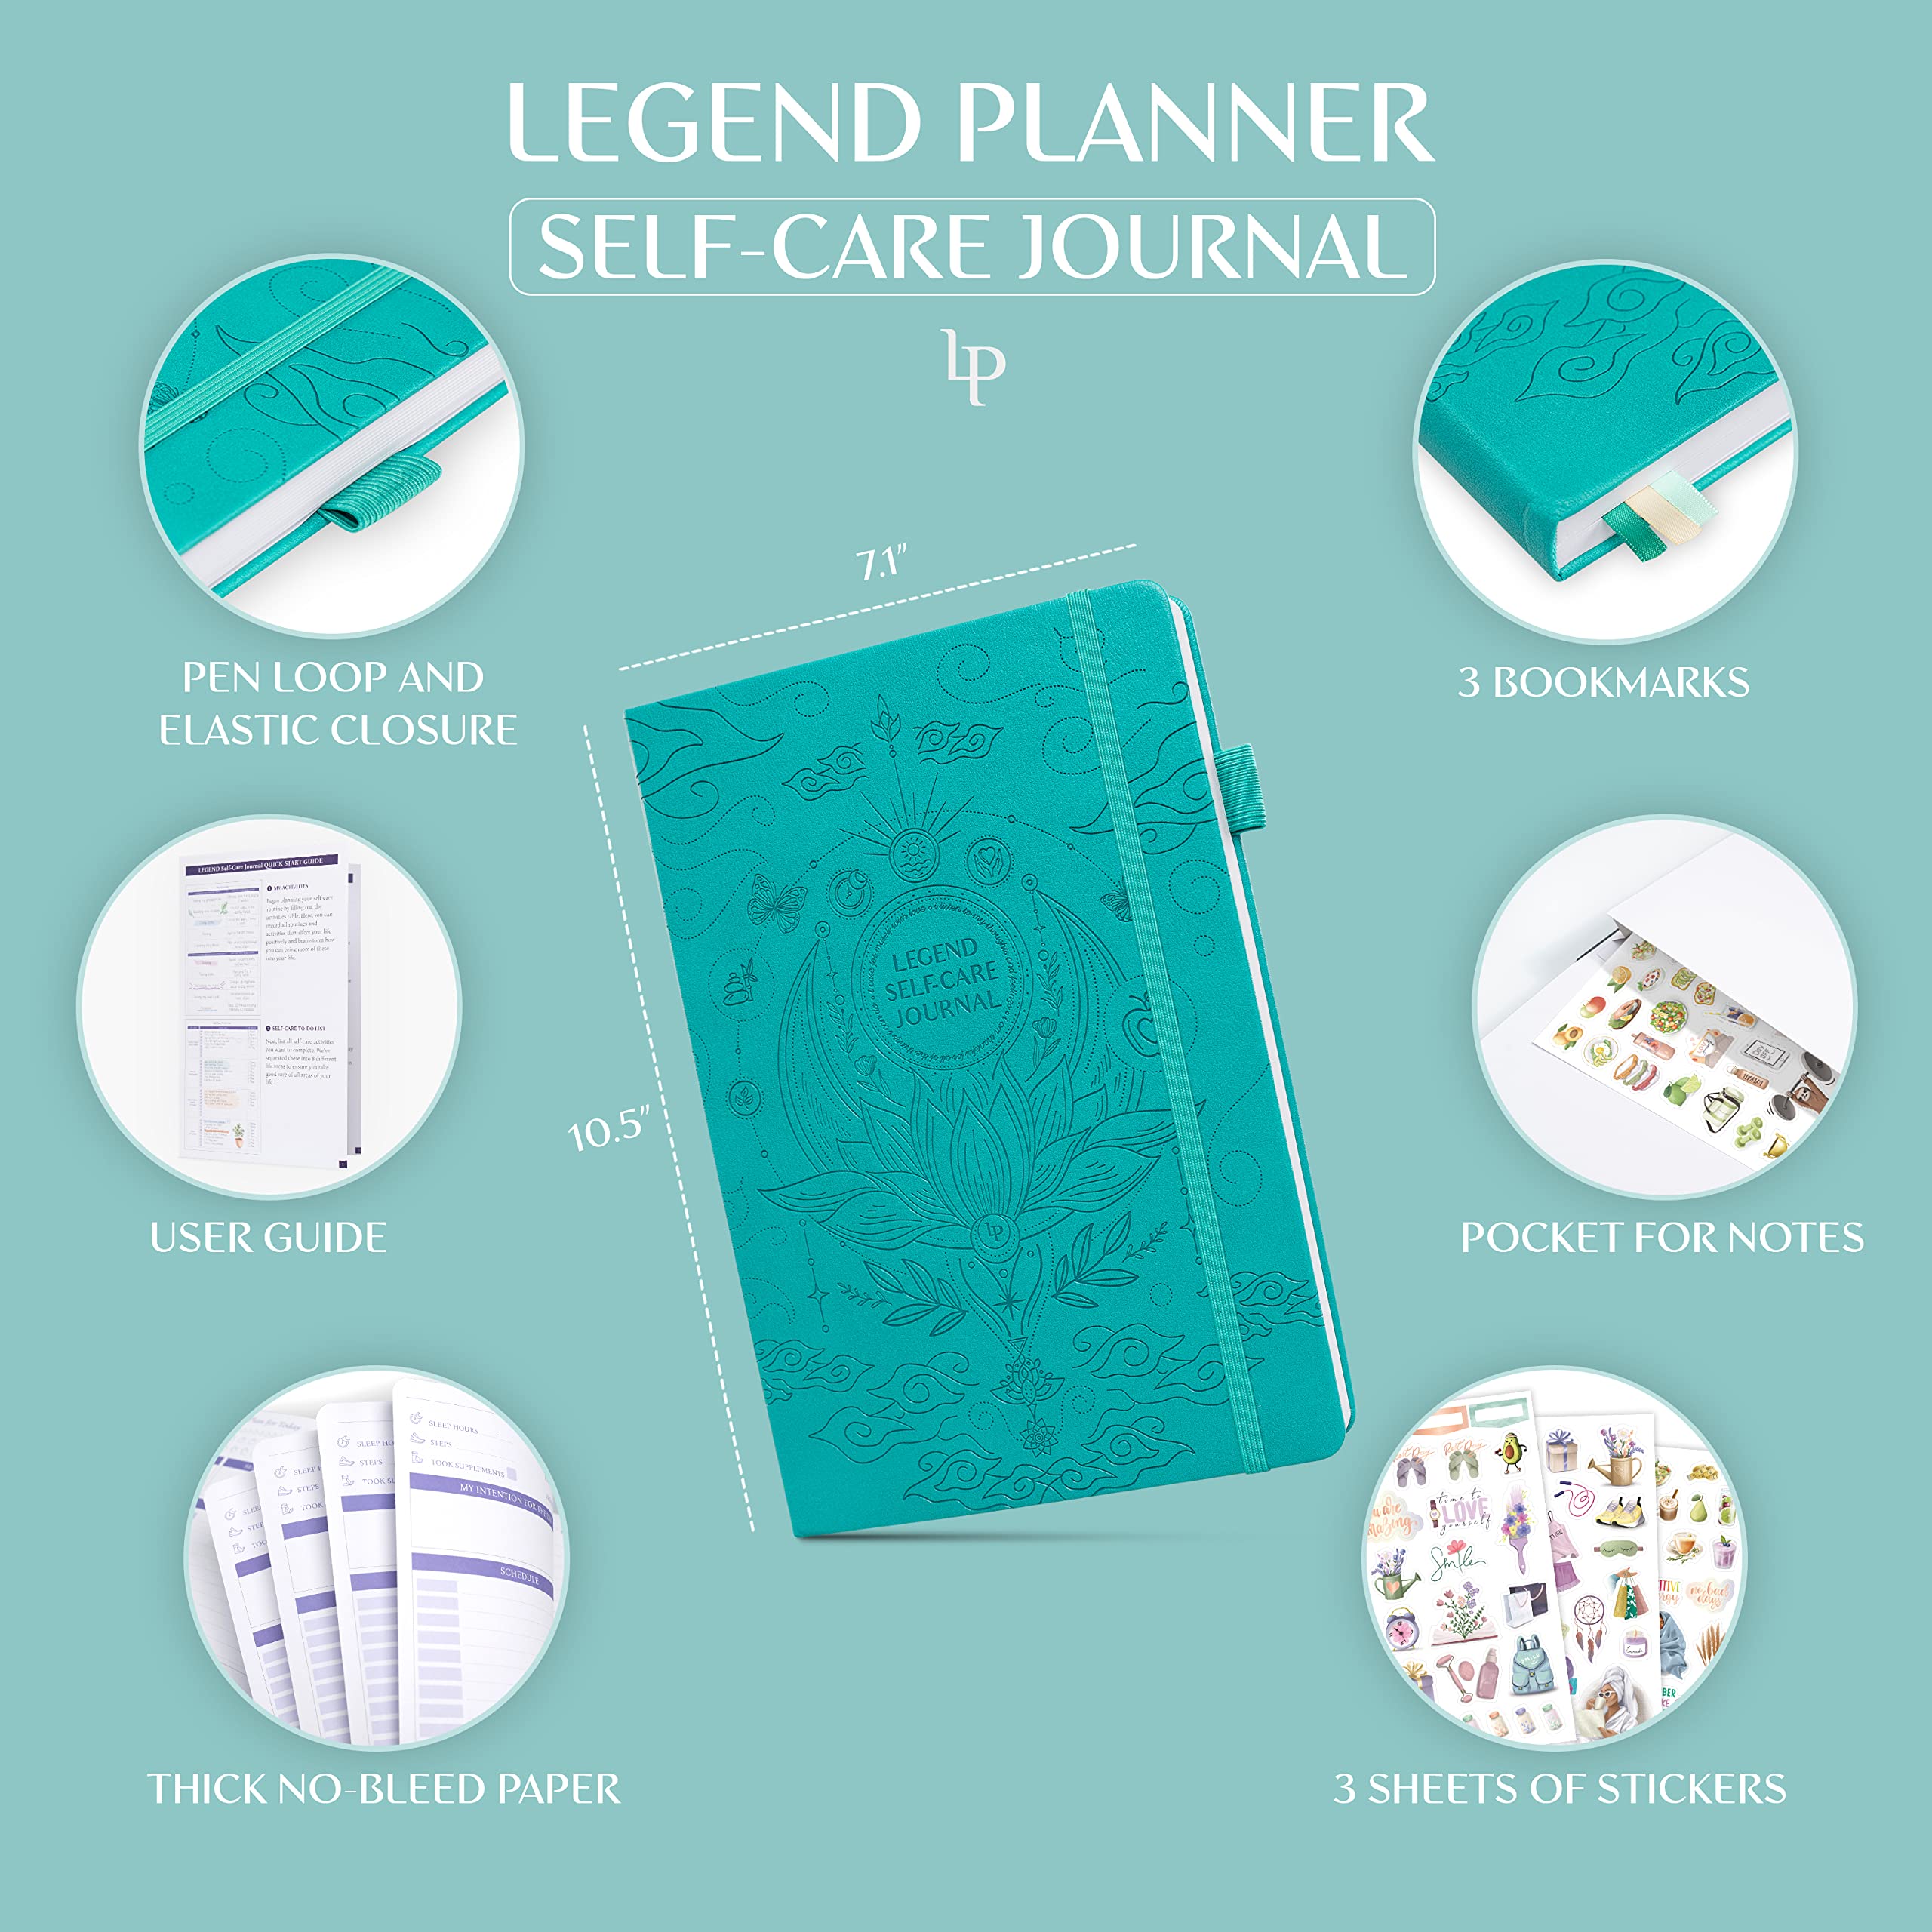 Legend Self-Care Journal – Guided Daily Reflection Journal to Support Mental & Physical Health – Daily Mood, Meditation & Personal Development Notebook – 26.5x18.5cm, Lasts 3 Months (Turquoise)